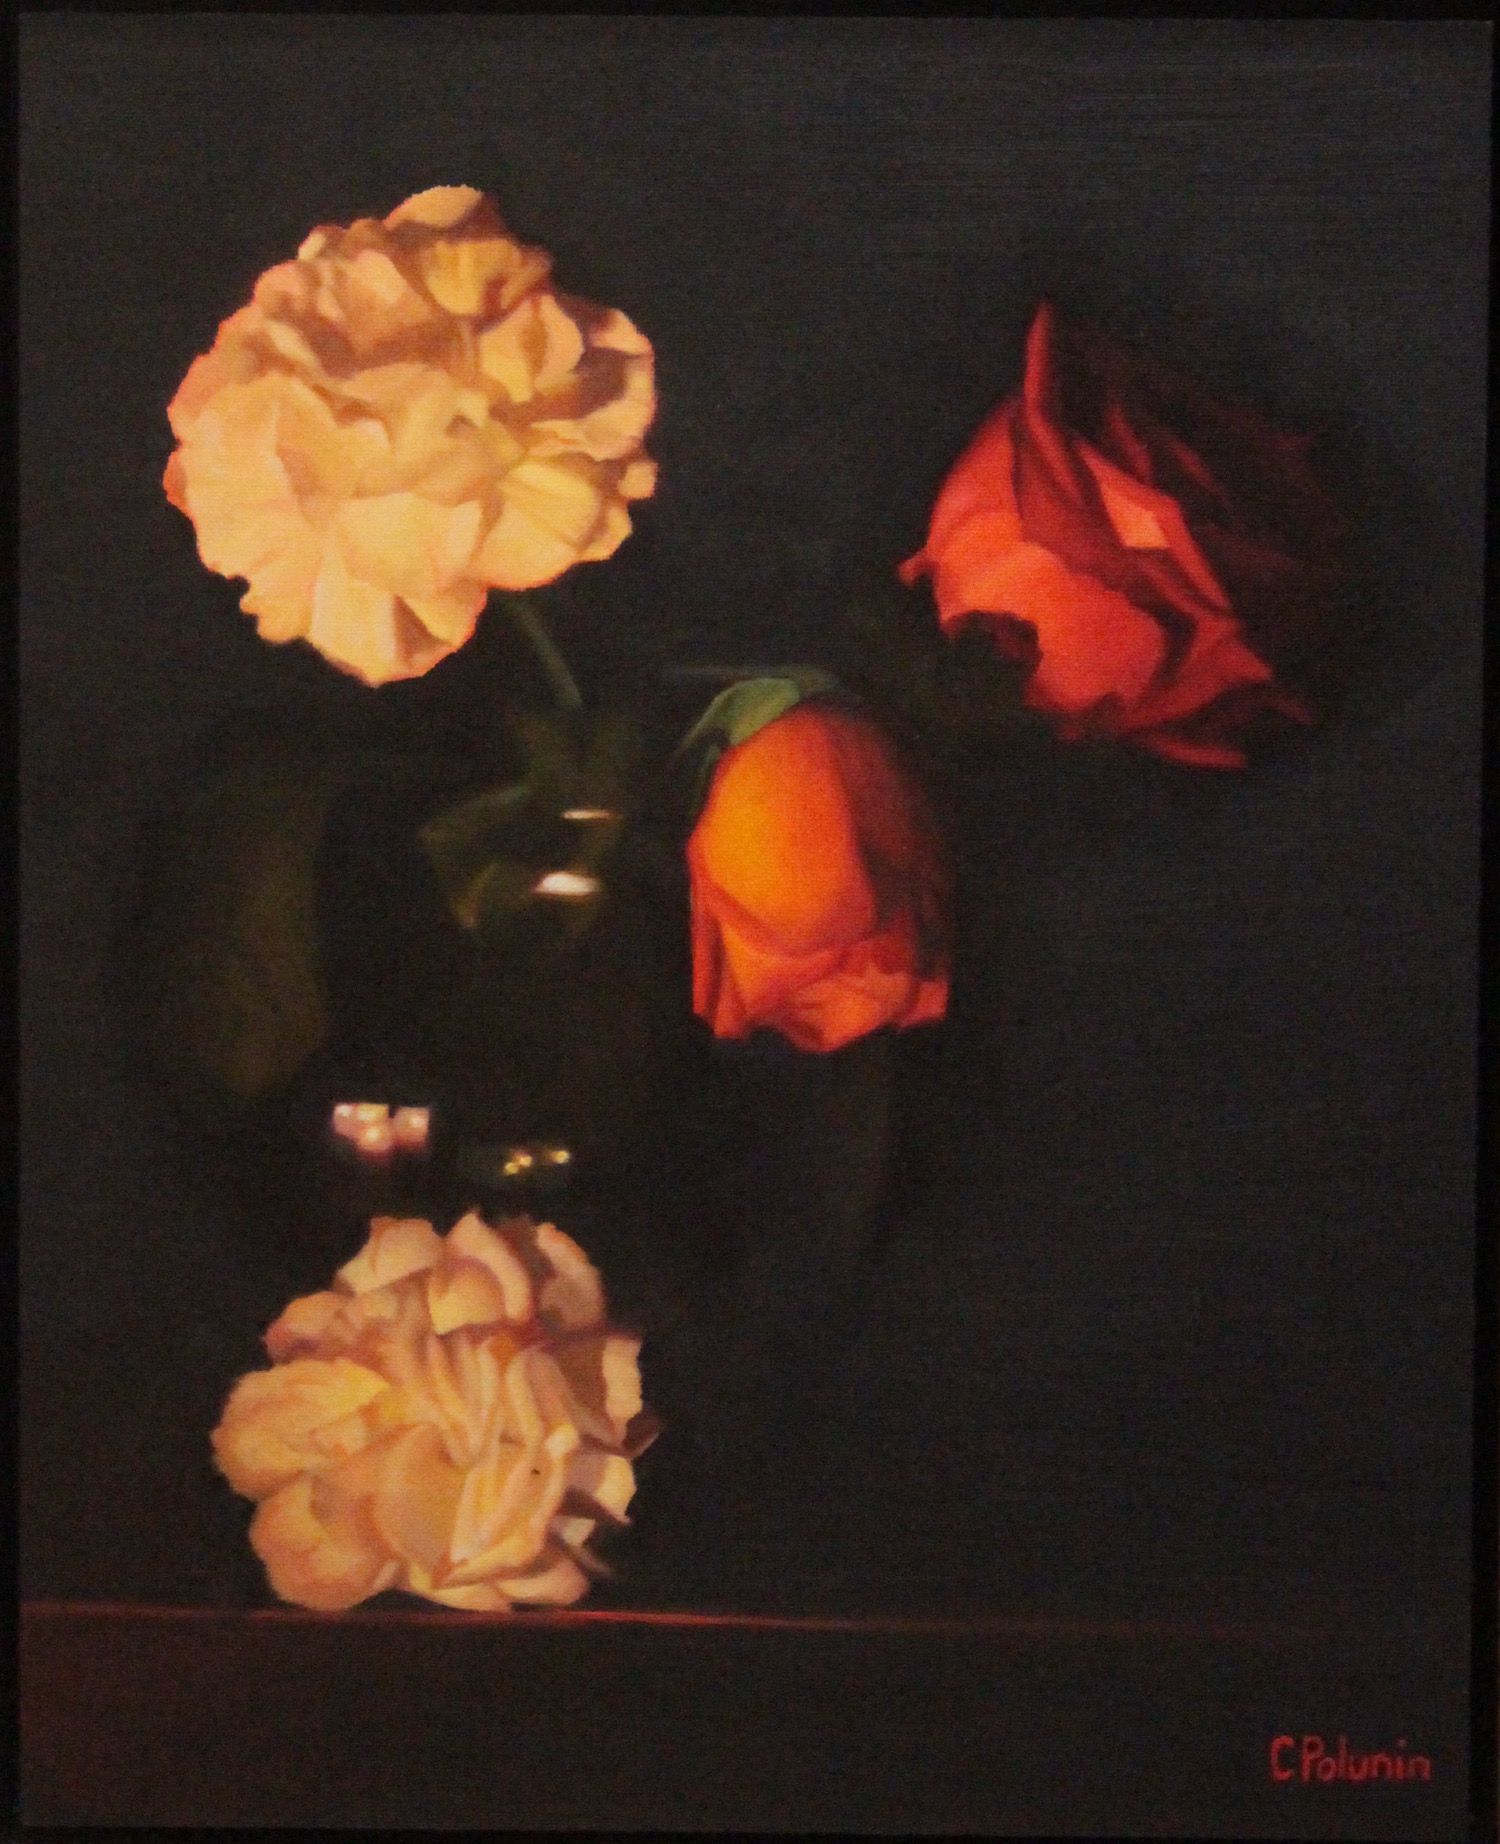 Flowers by Candlelight (small) by Chris Polunin